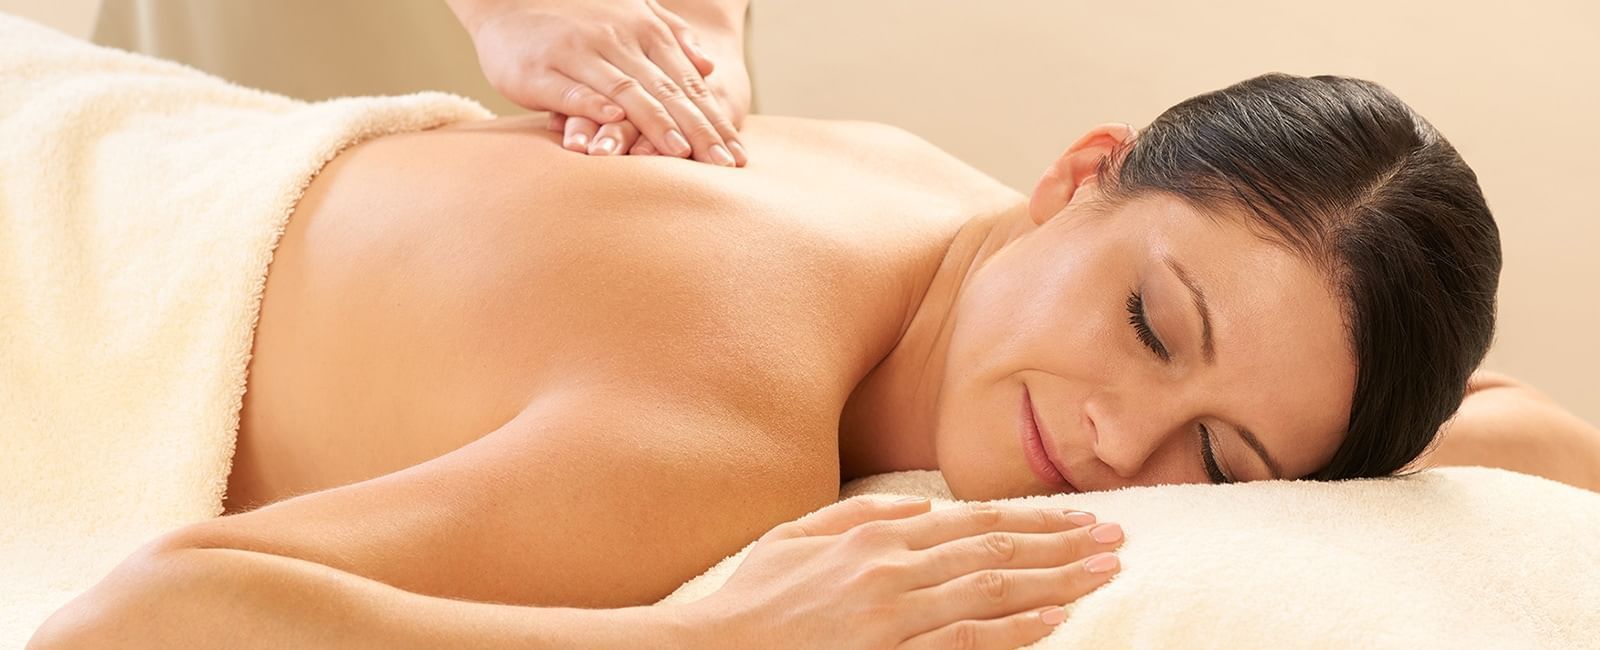 A lady receiving a massage at the Spa in the hotel